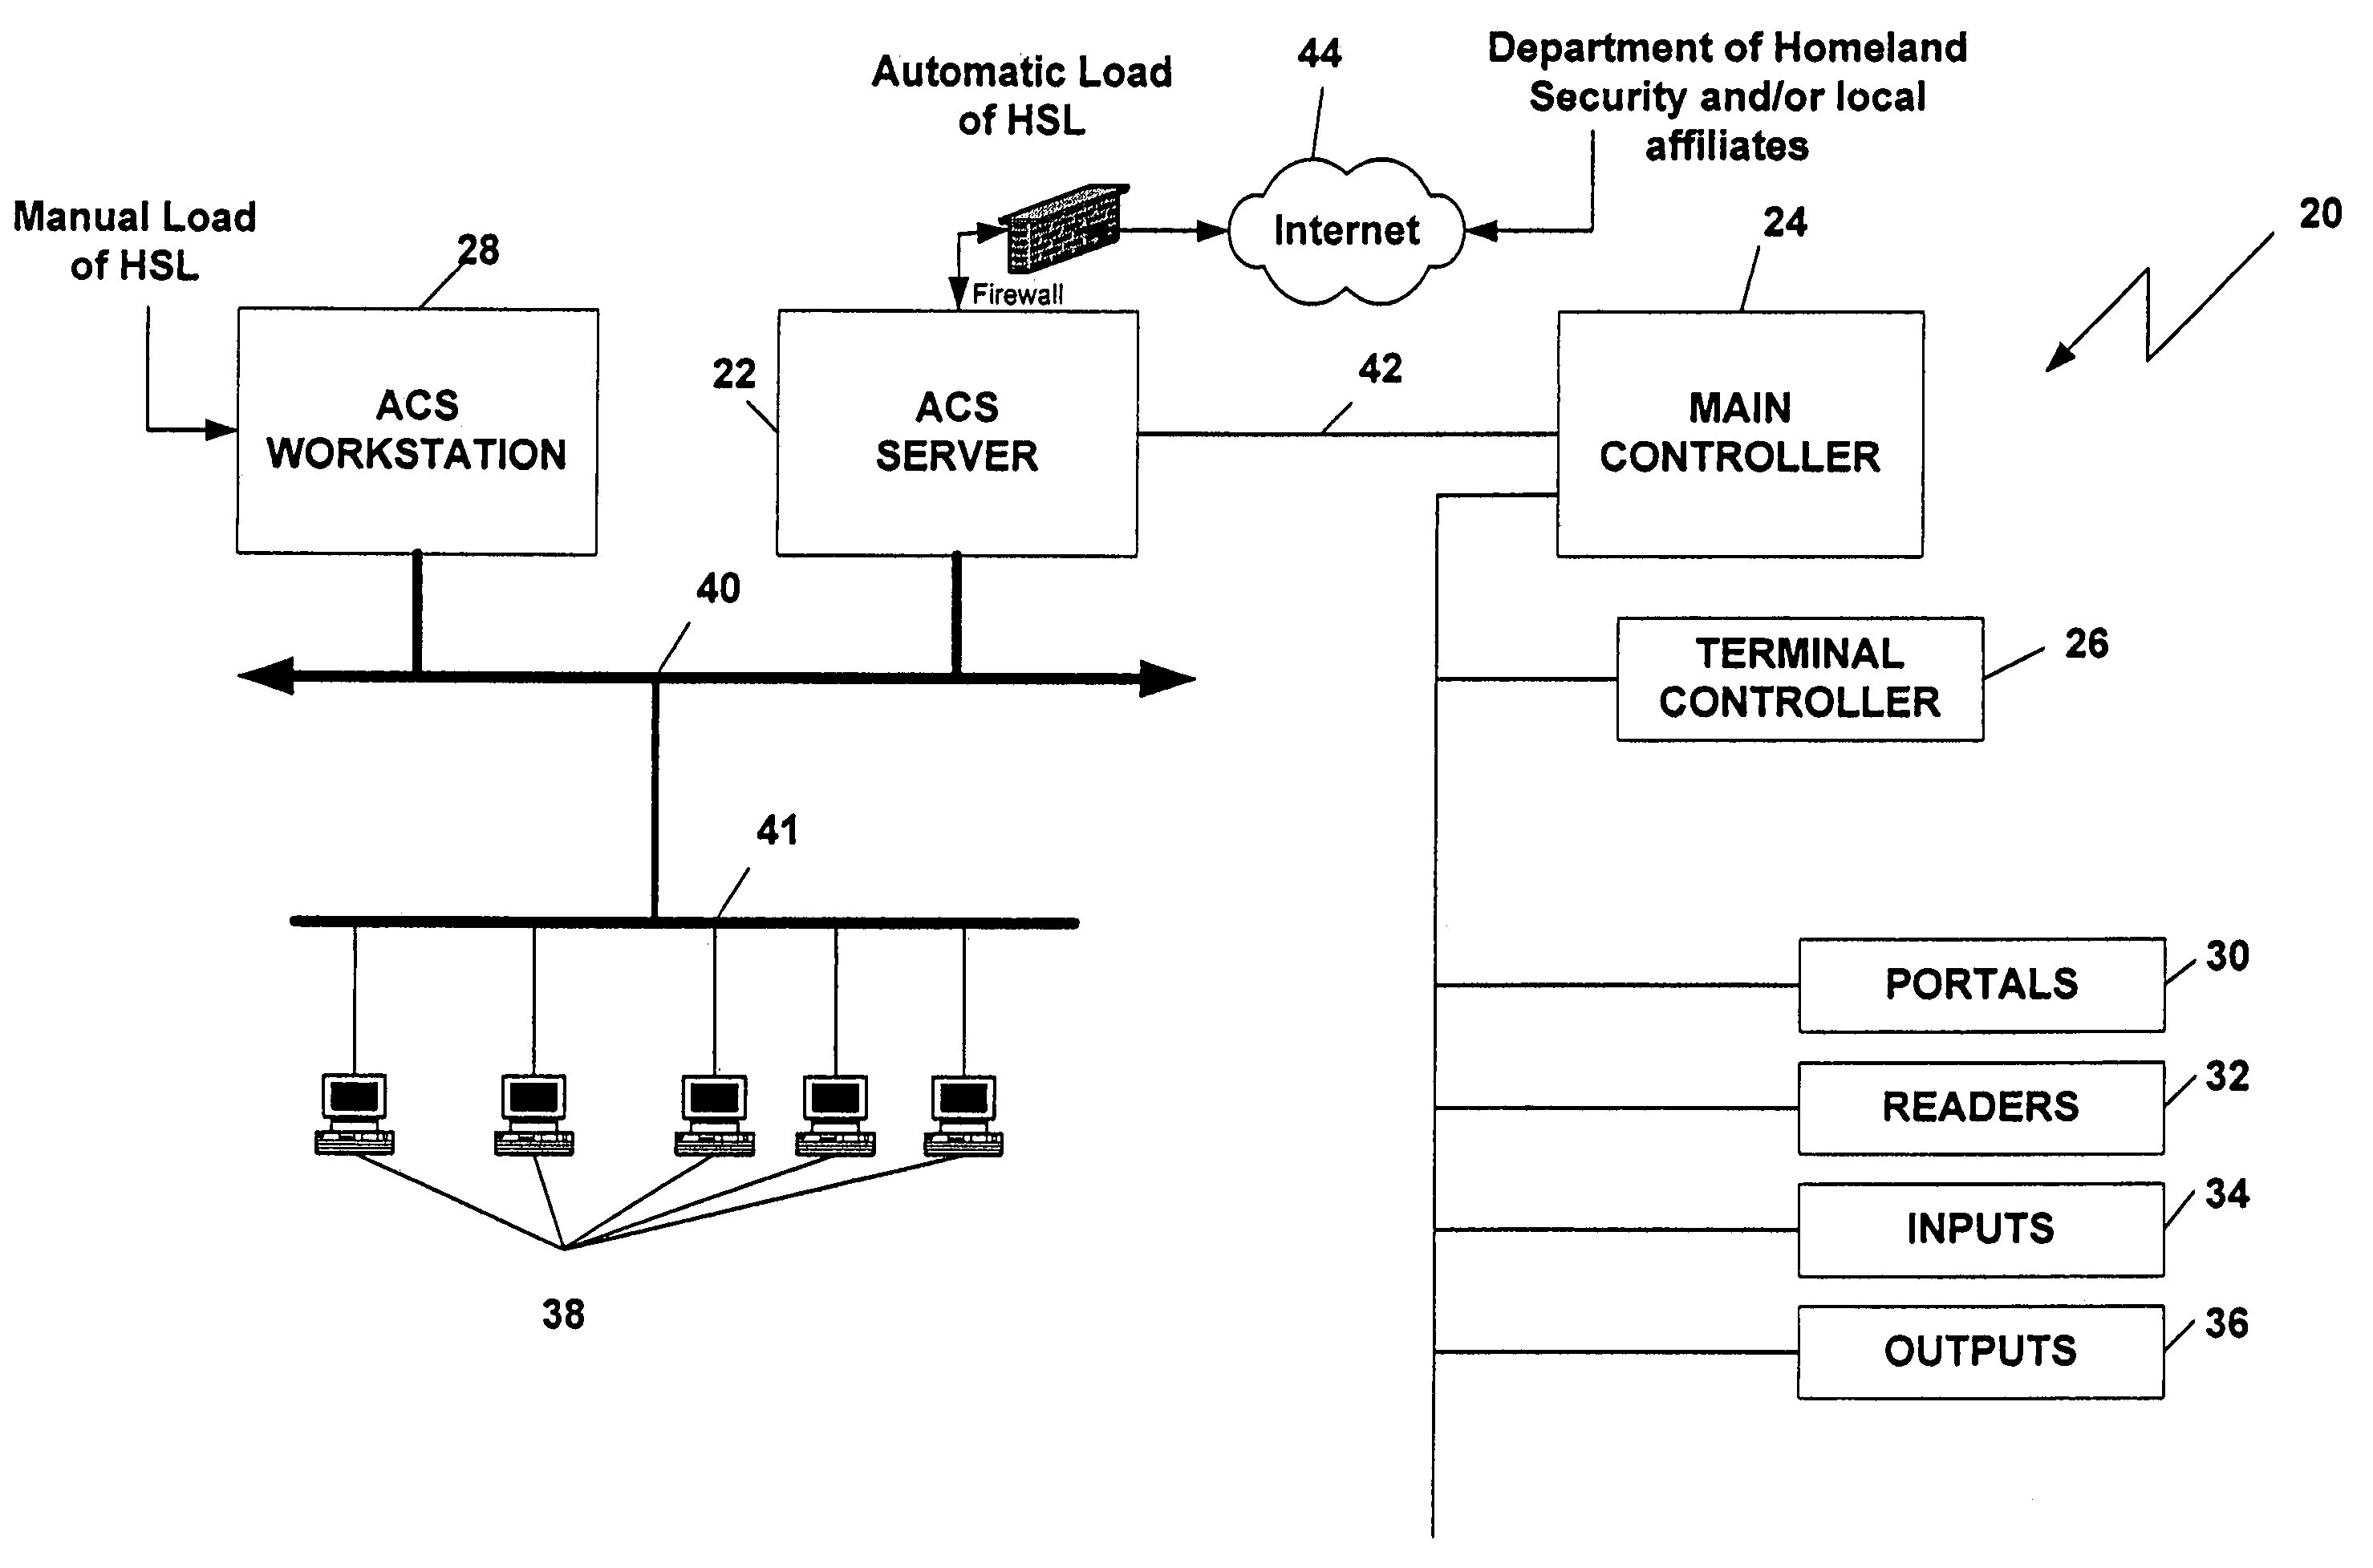 System and method for adjusting access control based on homeland security levels